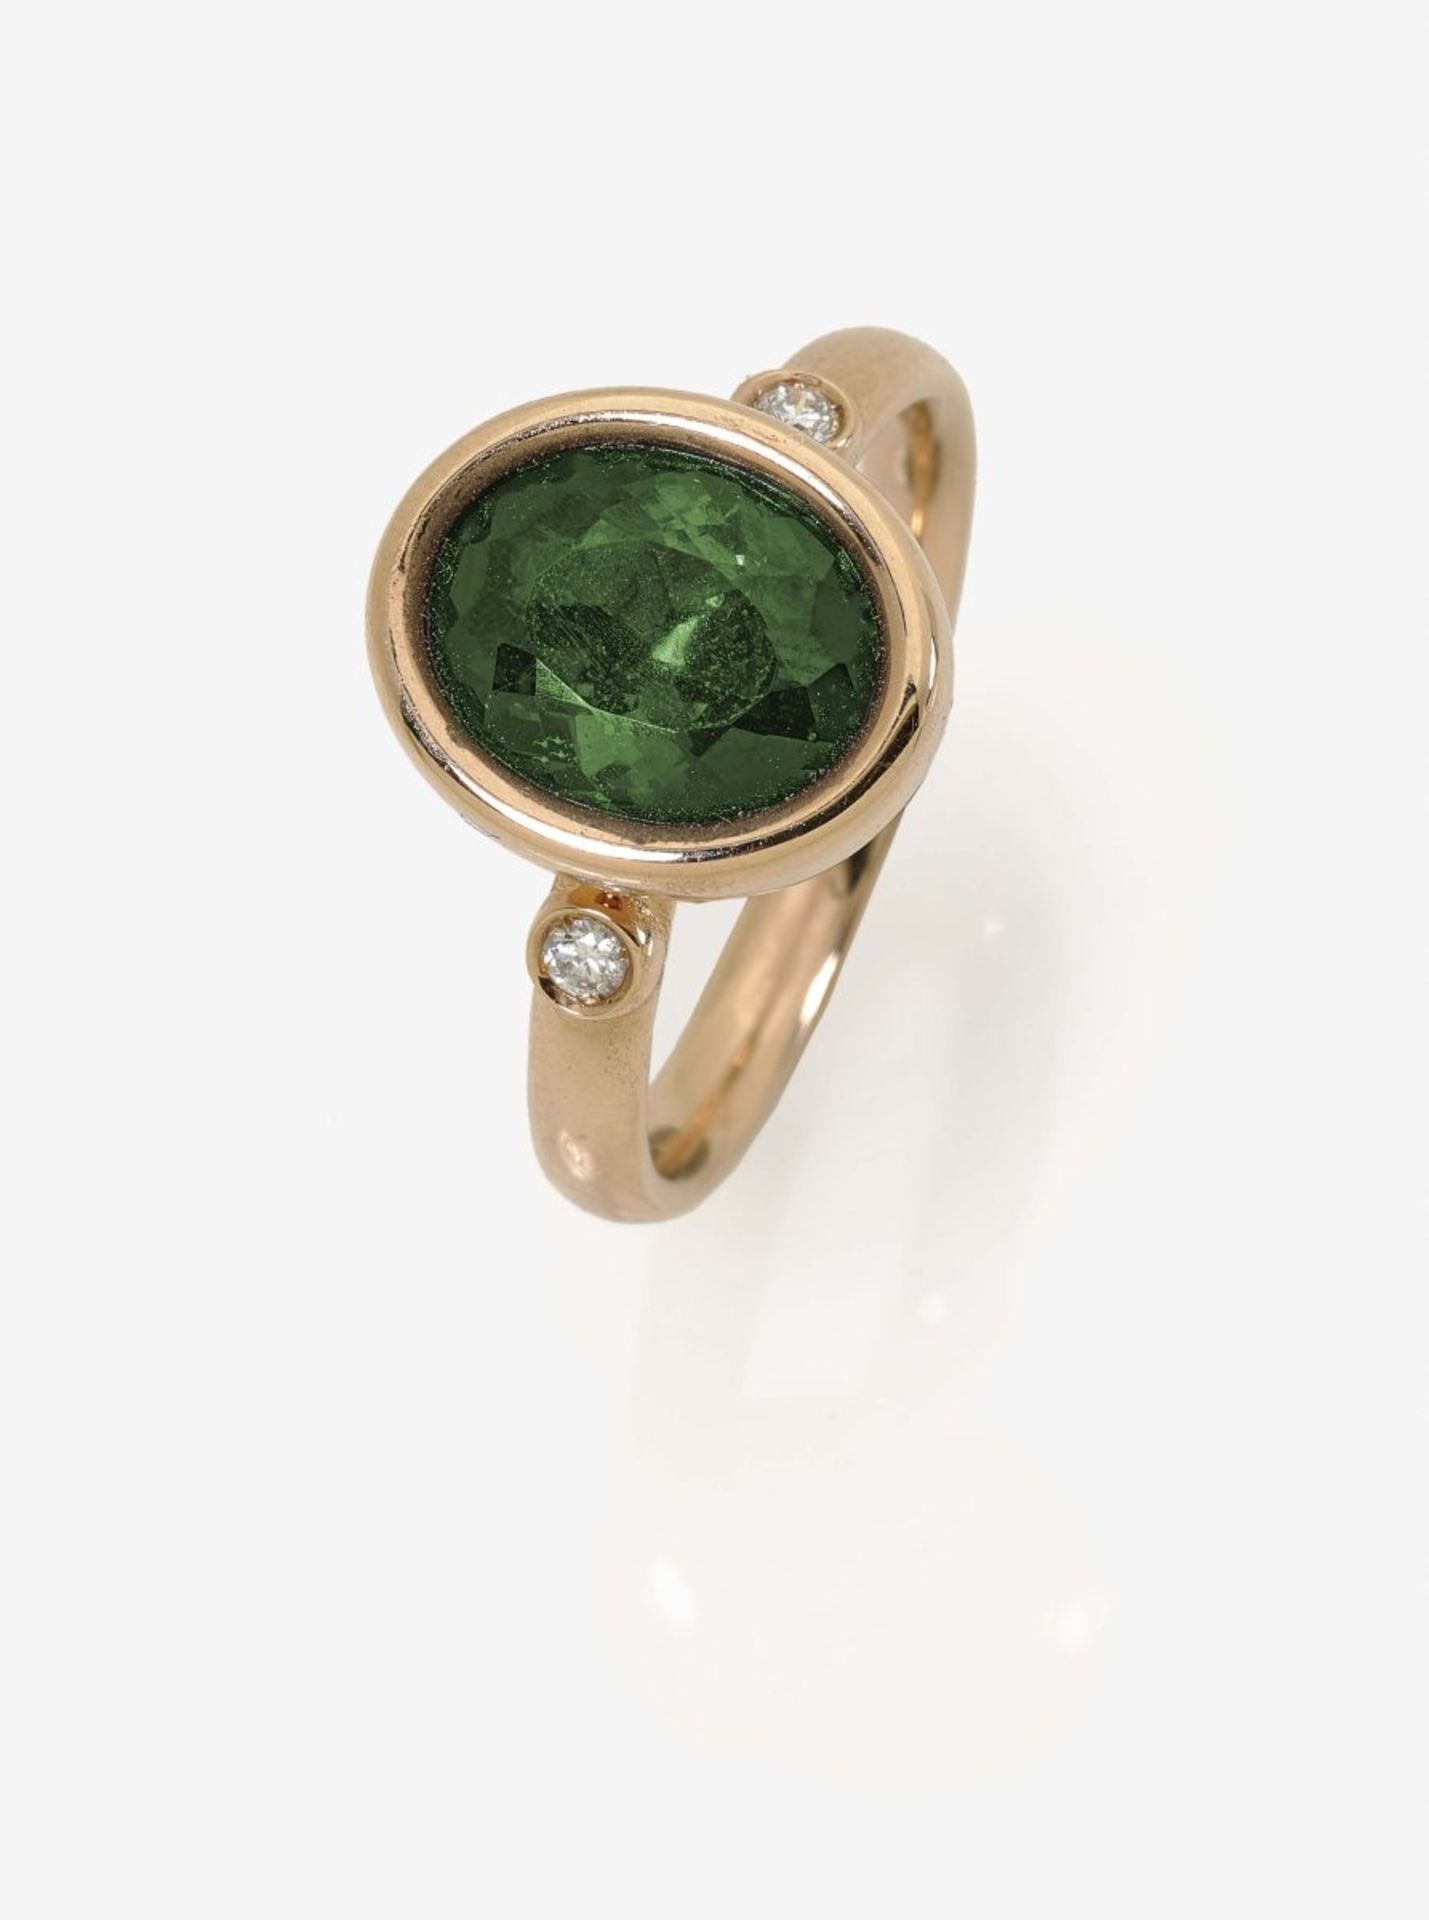 A Tourmaline and Diamond Ring18K yellow gold (750/-), stamped. Maker's mark W. 2 small brilliant-cut